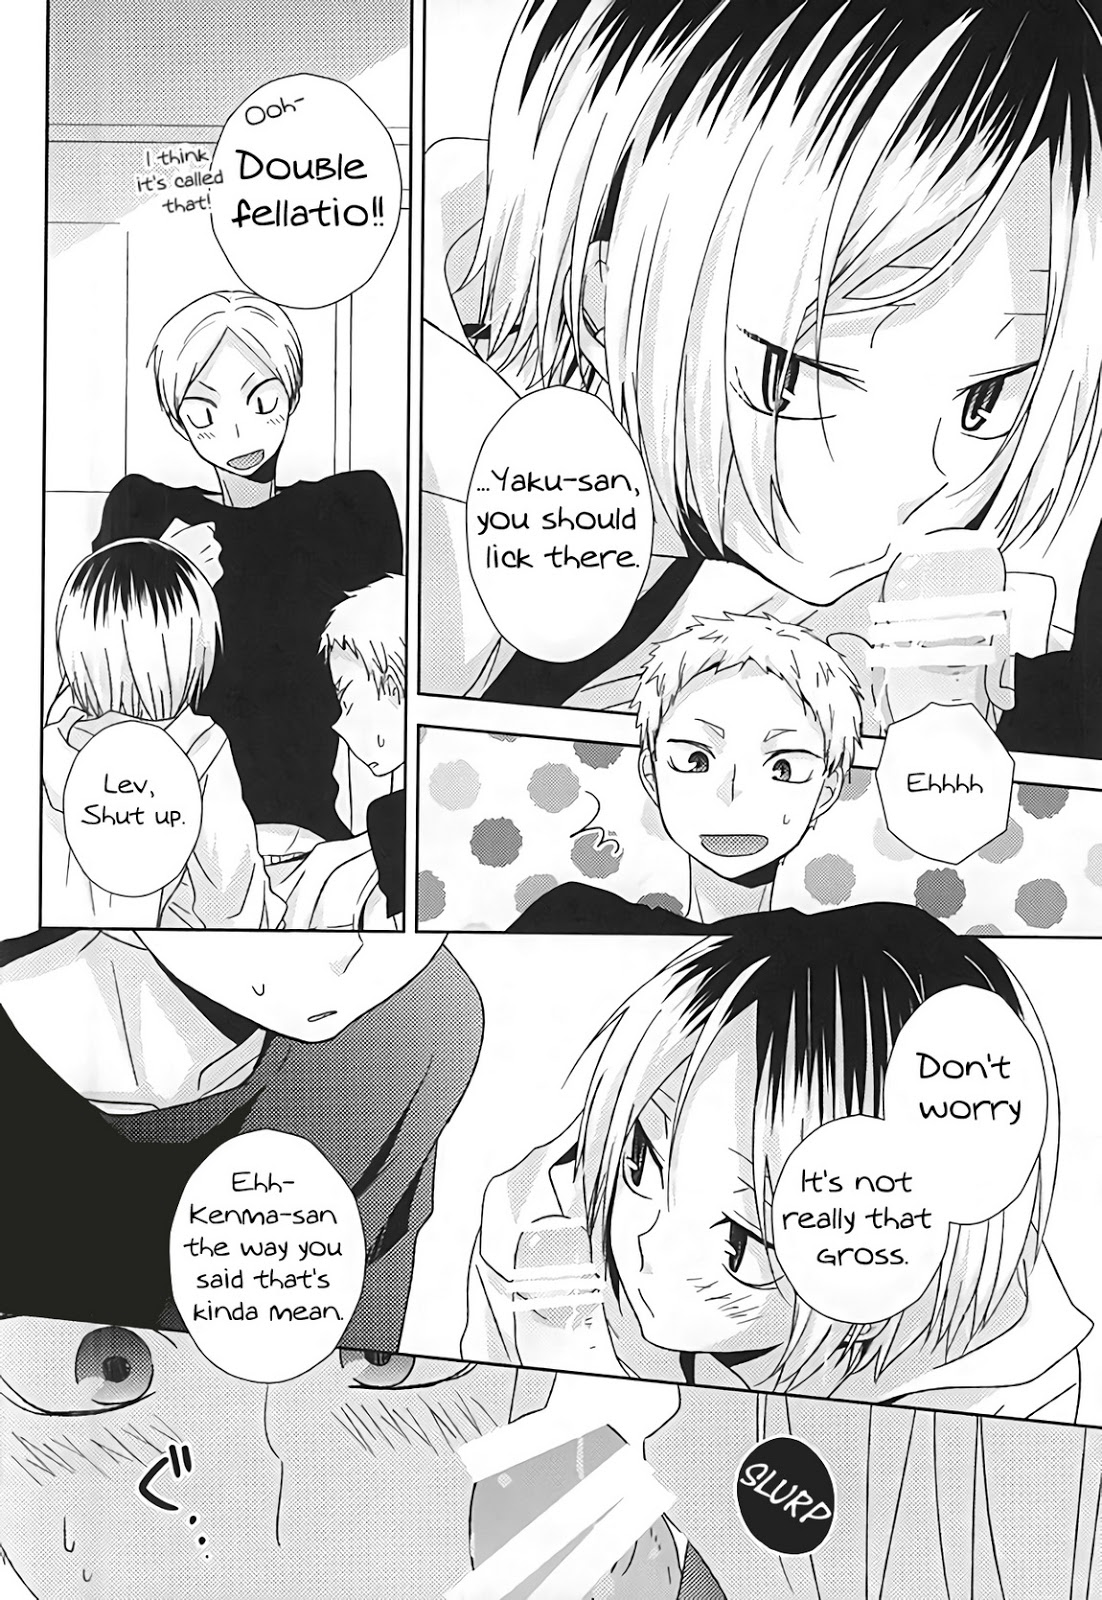 (SPARK10) [MOBRIS (Tomoharu)] HOWtoPLAY tutrial (Haikyuu!!) [English] [Homies over Hoes] page 11 full